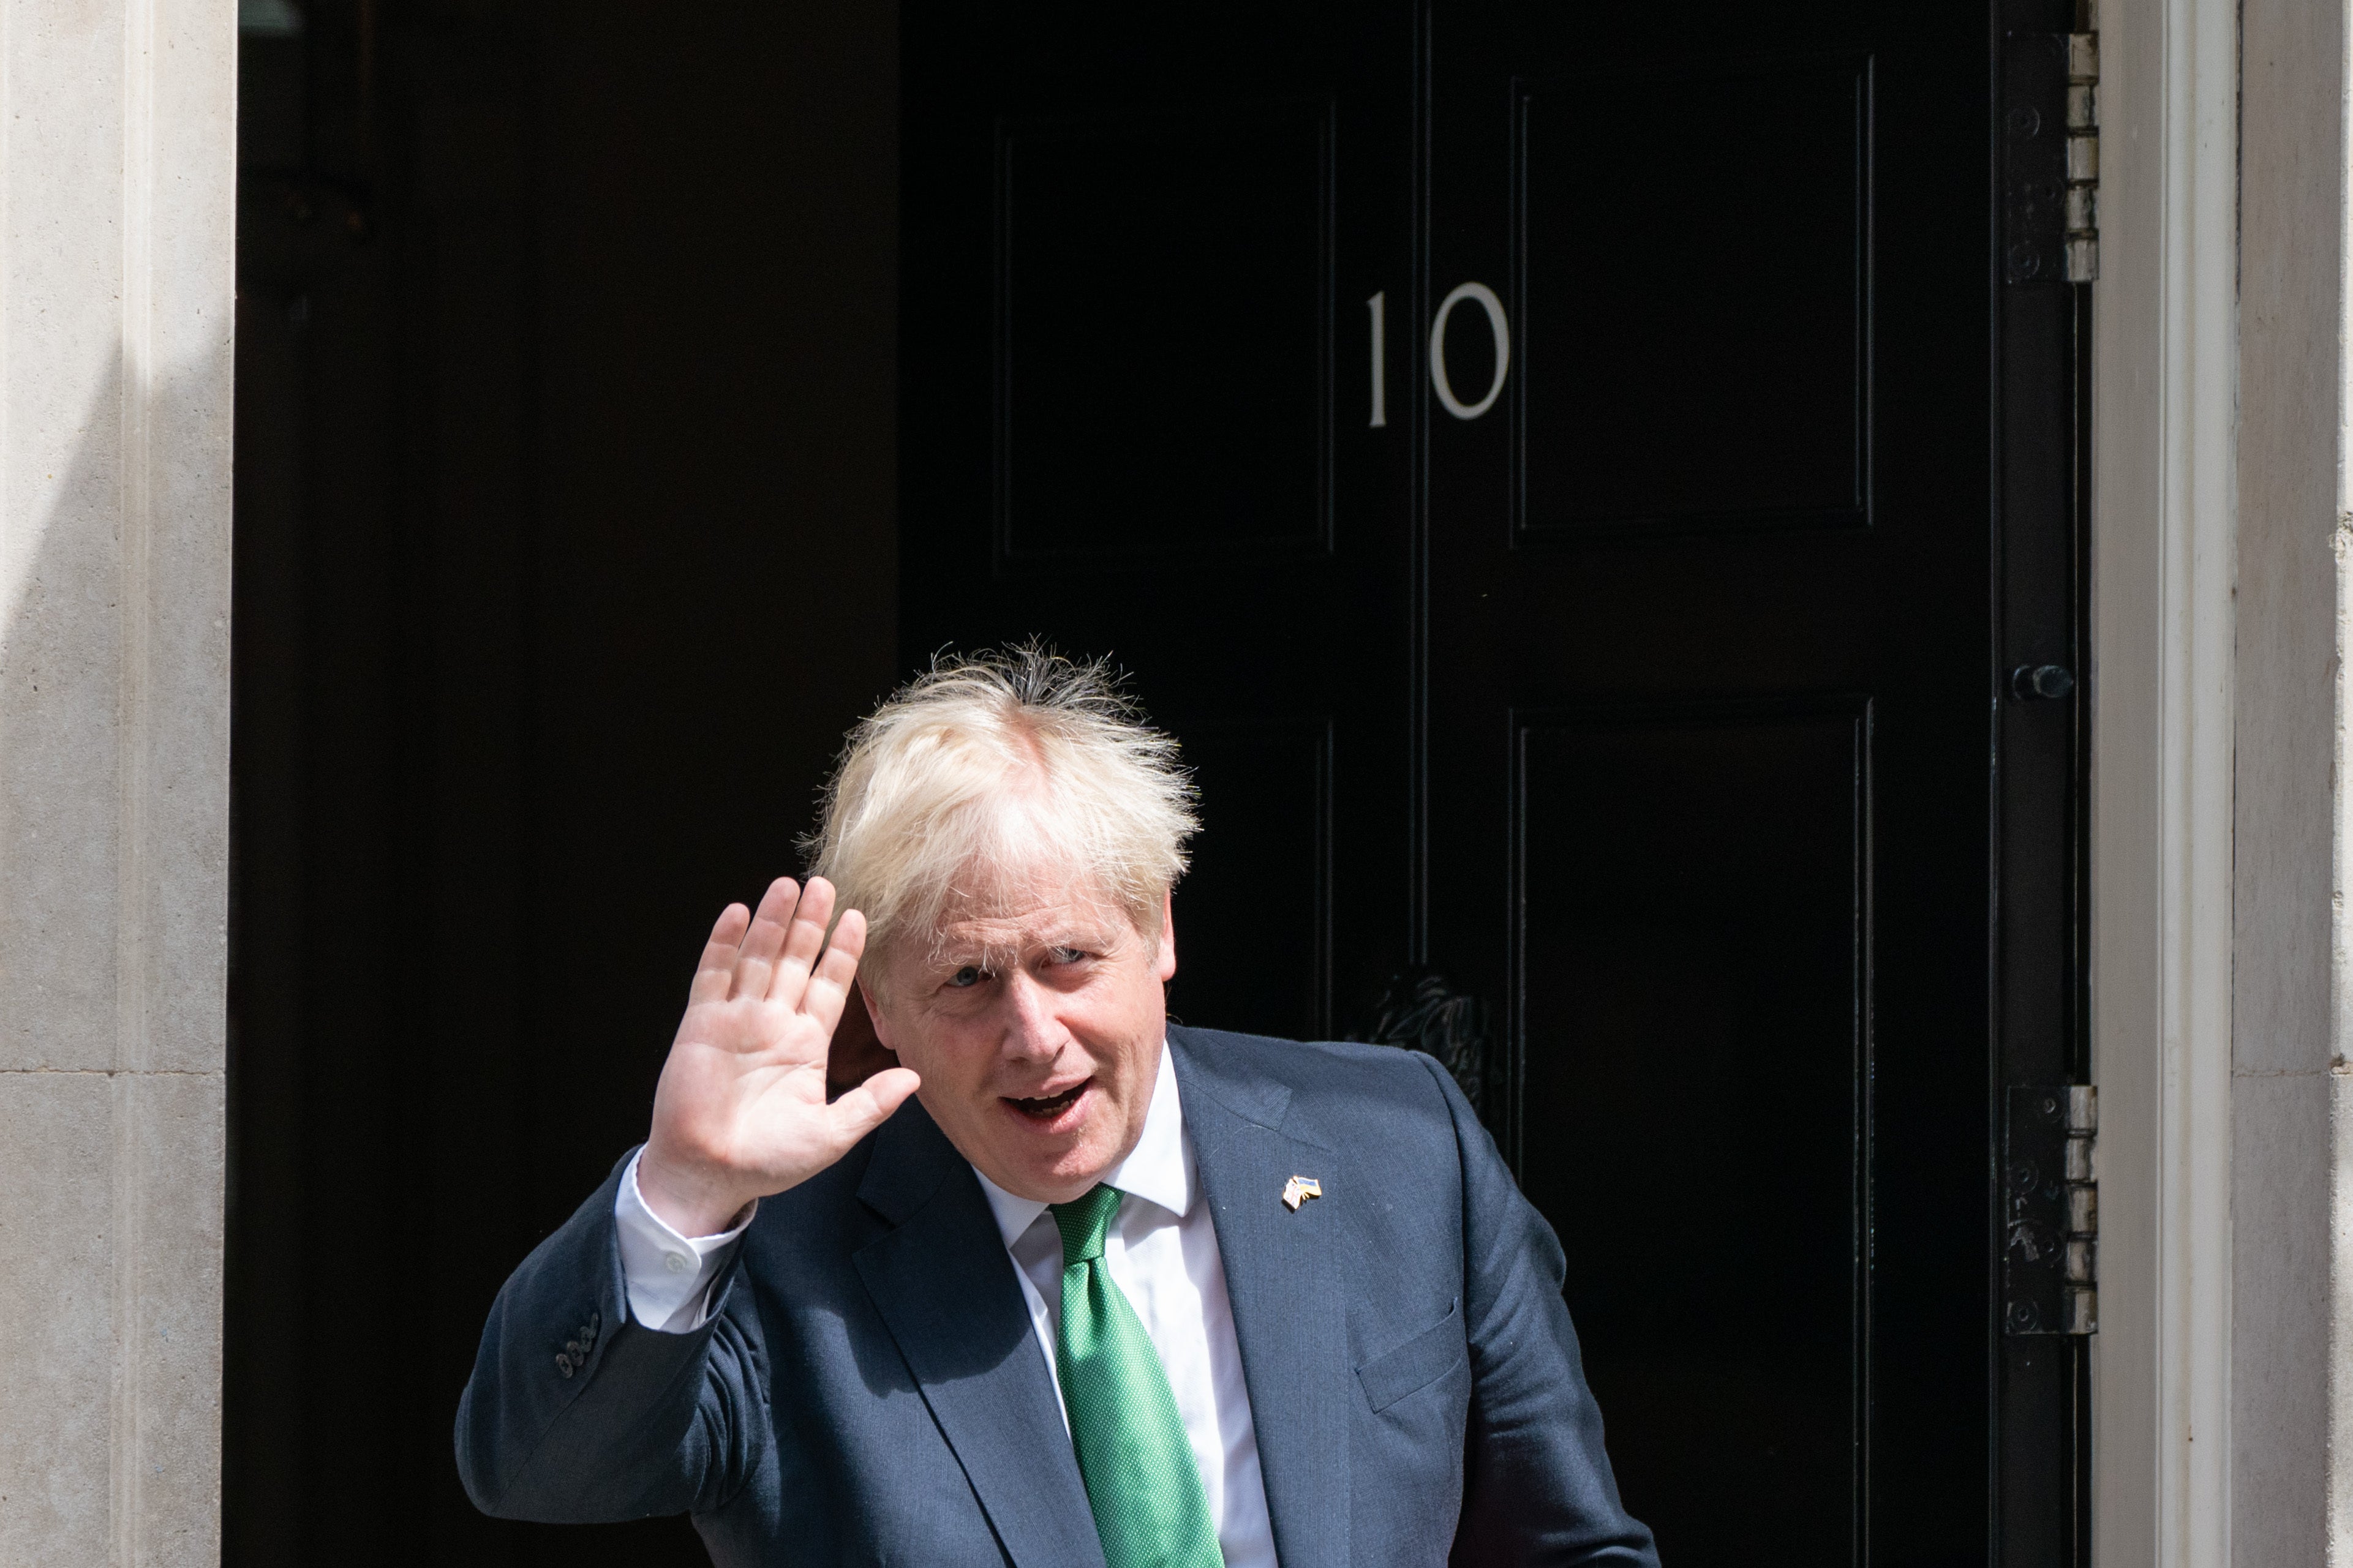 Unlike his predecessors, Johnson has shown not an ounce of contrition